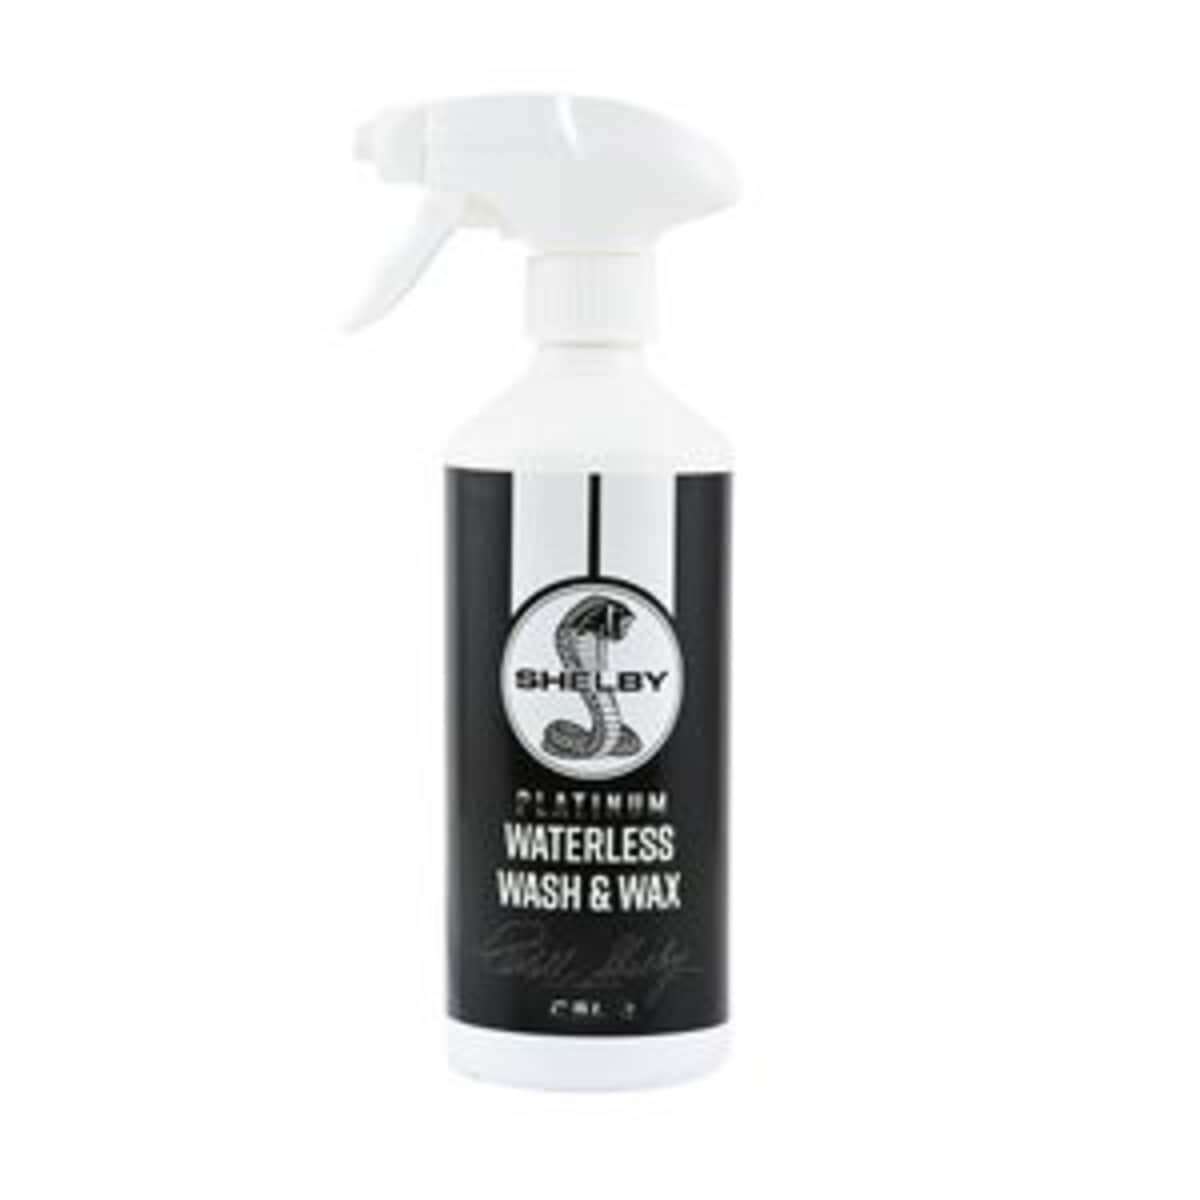 Shelby Platinum Waterless Car Wash & Wax (16.9 oz) image number 0